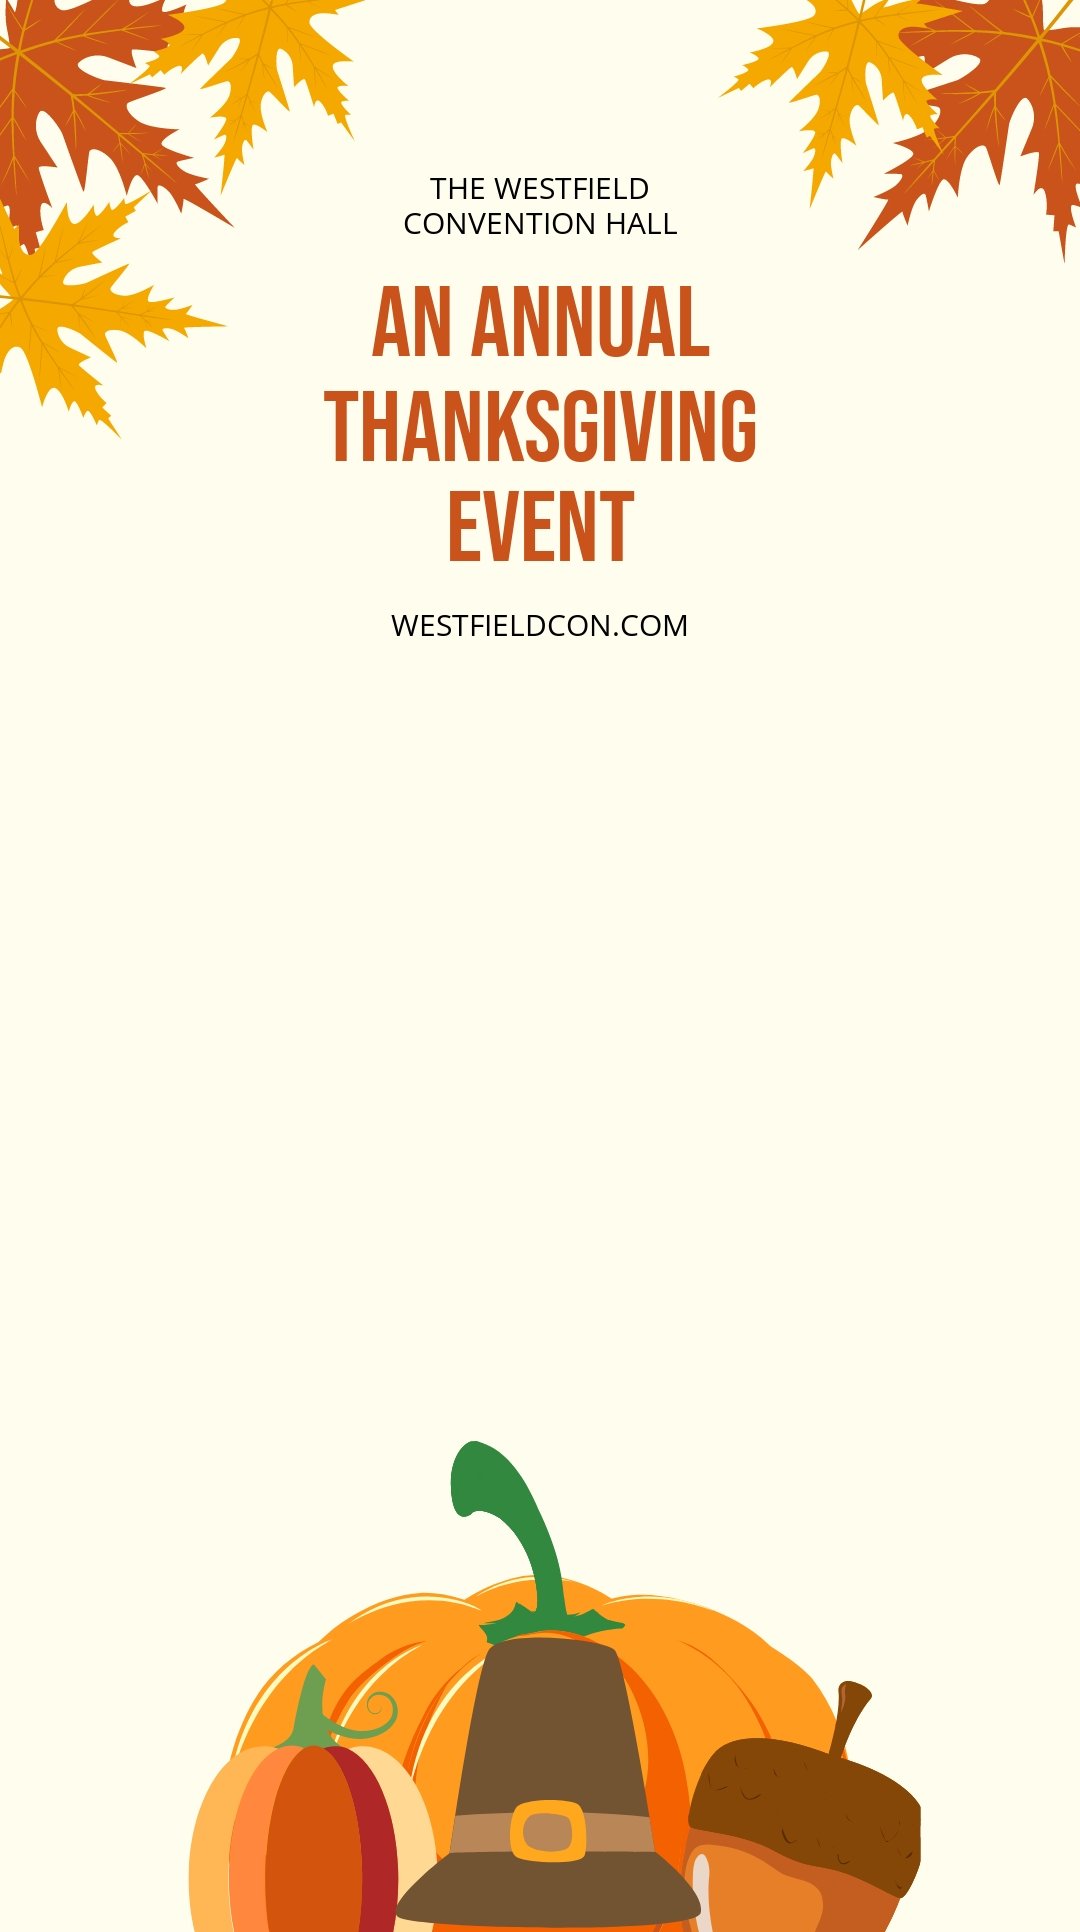 Free Thanksgiving Event Snapchat Geofilter Template